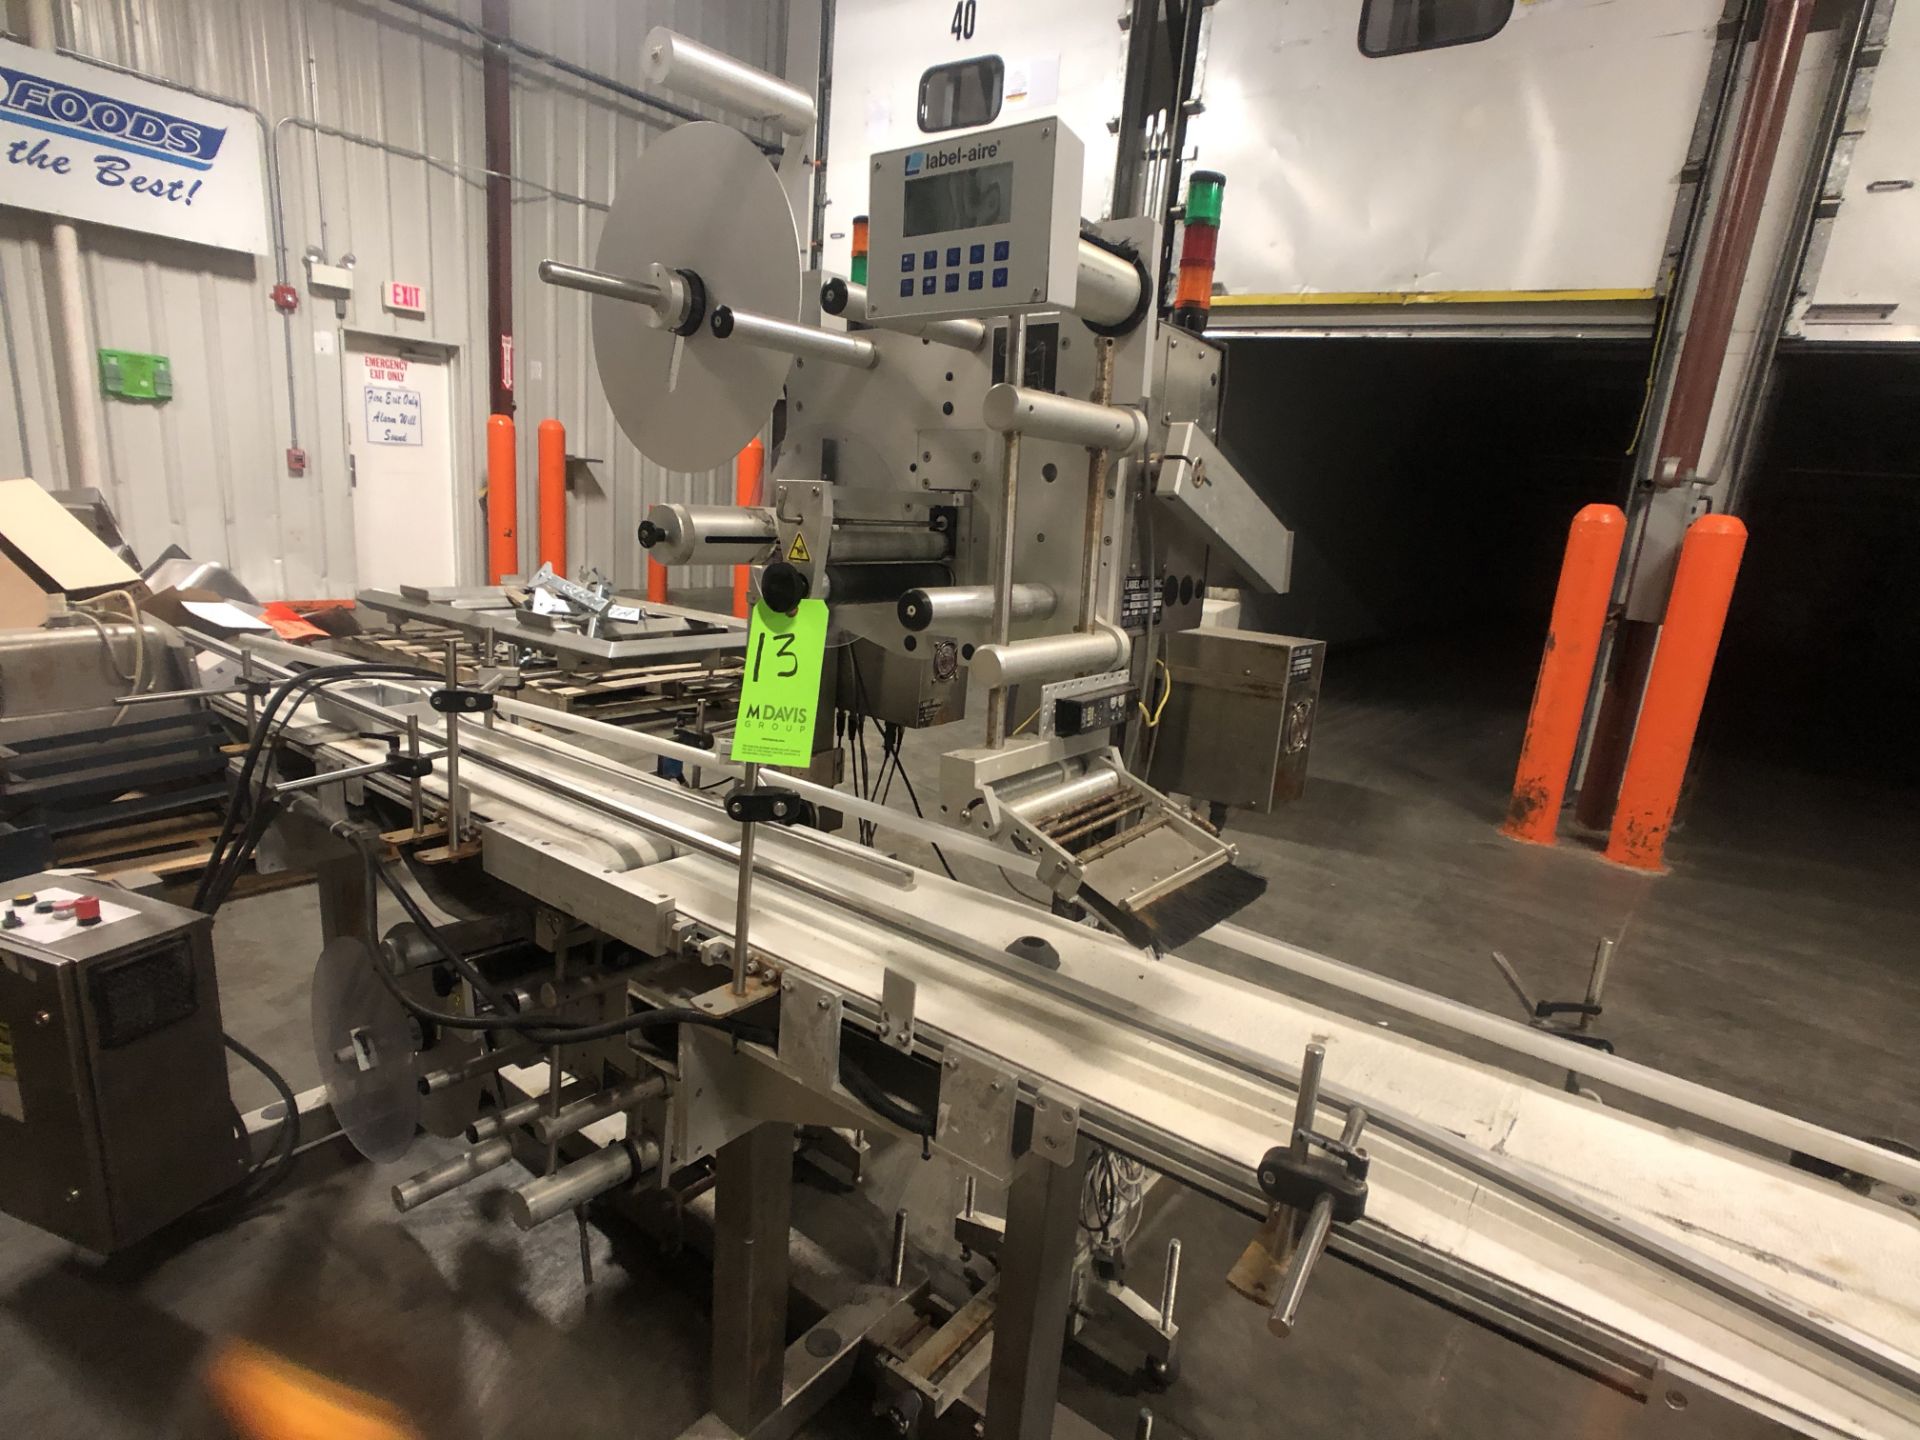 LABEL-AIRE CONVEYORIZED TOP AND BOTTOM ROLL-FED PRESSURE SENSITIVE LABELER, MODEL 3115NV-1500, S/N